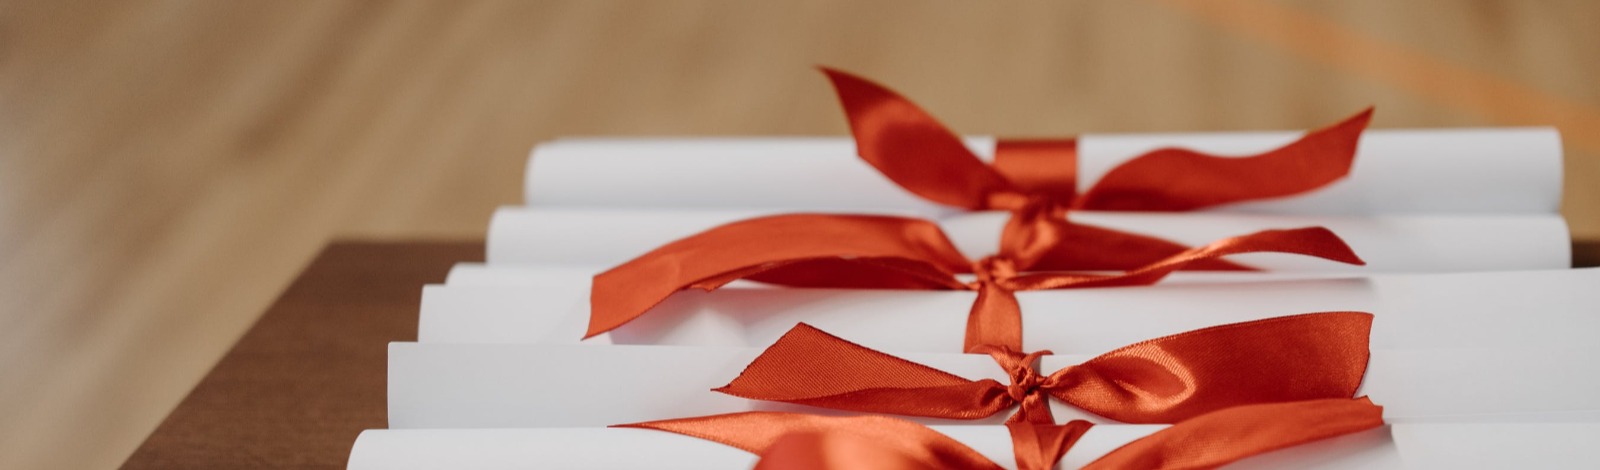 multiple scrolls of paper tied with ribbon